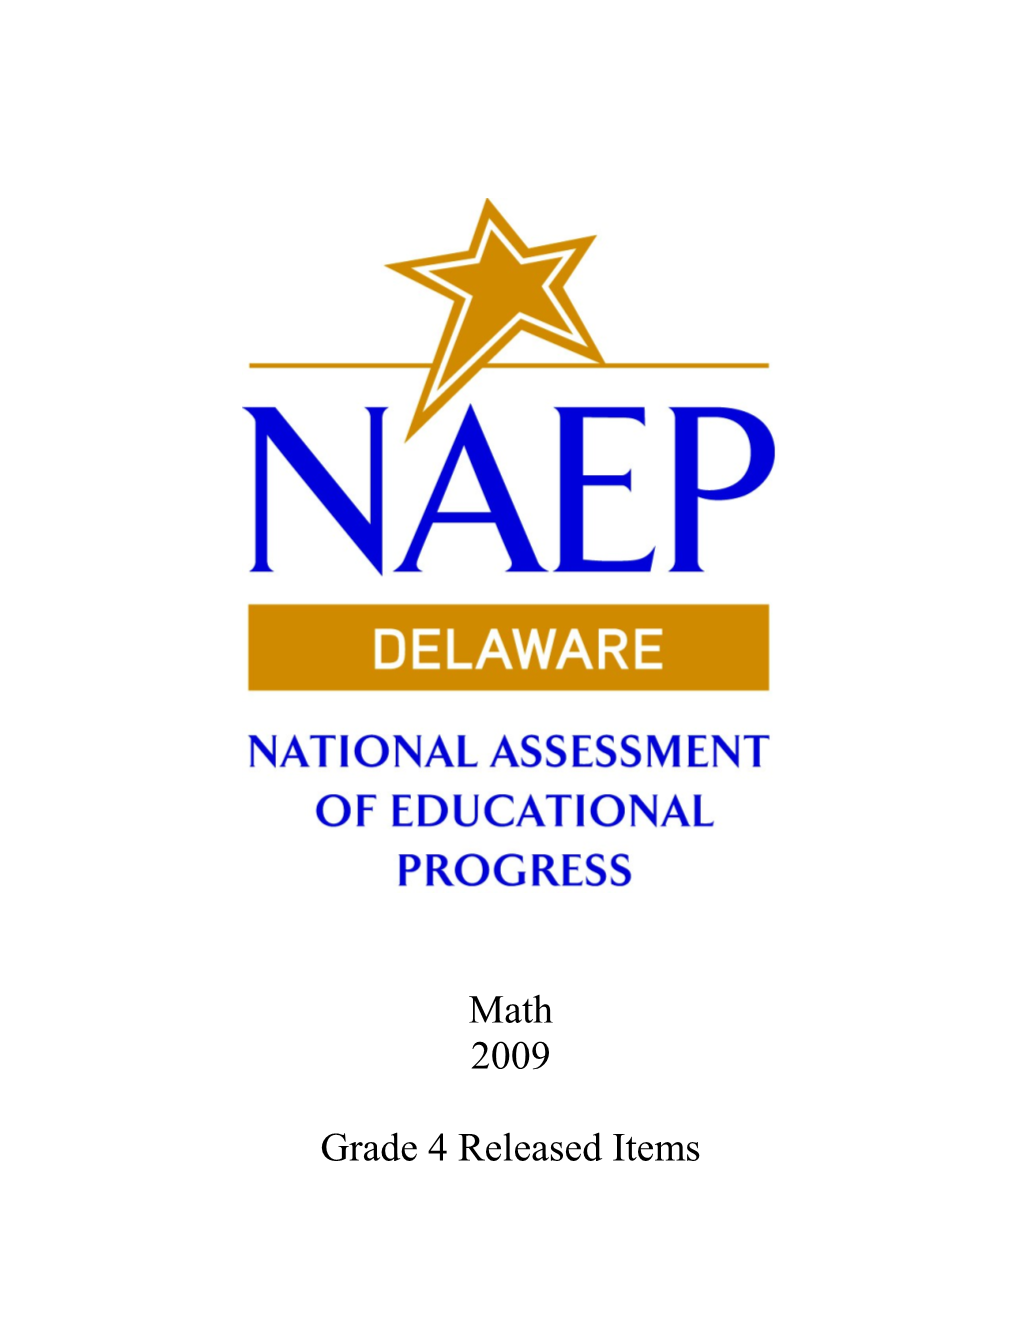 NAEP 2009 Math Grade 4 Released Items